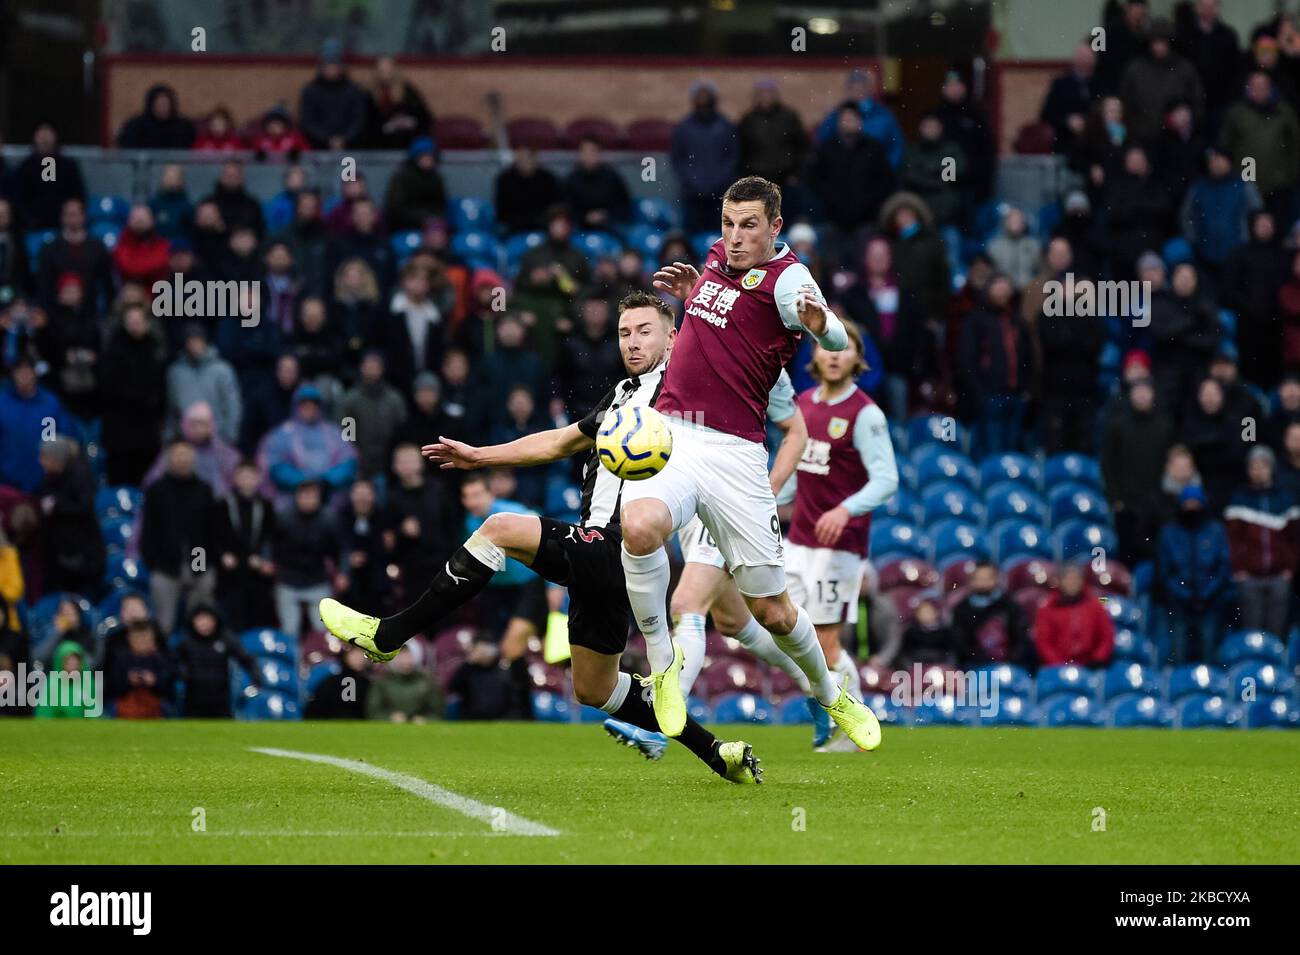 Burnley forward Chris Wood and Newcastle United defender Paul Dummett during the Premier League match between Burnley and Newcastle United at Turf Moor, Burnley on Saturday 14th December 2019. (Credit: Andy Whitehead | MI News) Stock Photo